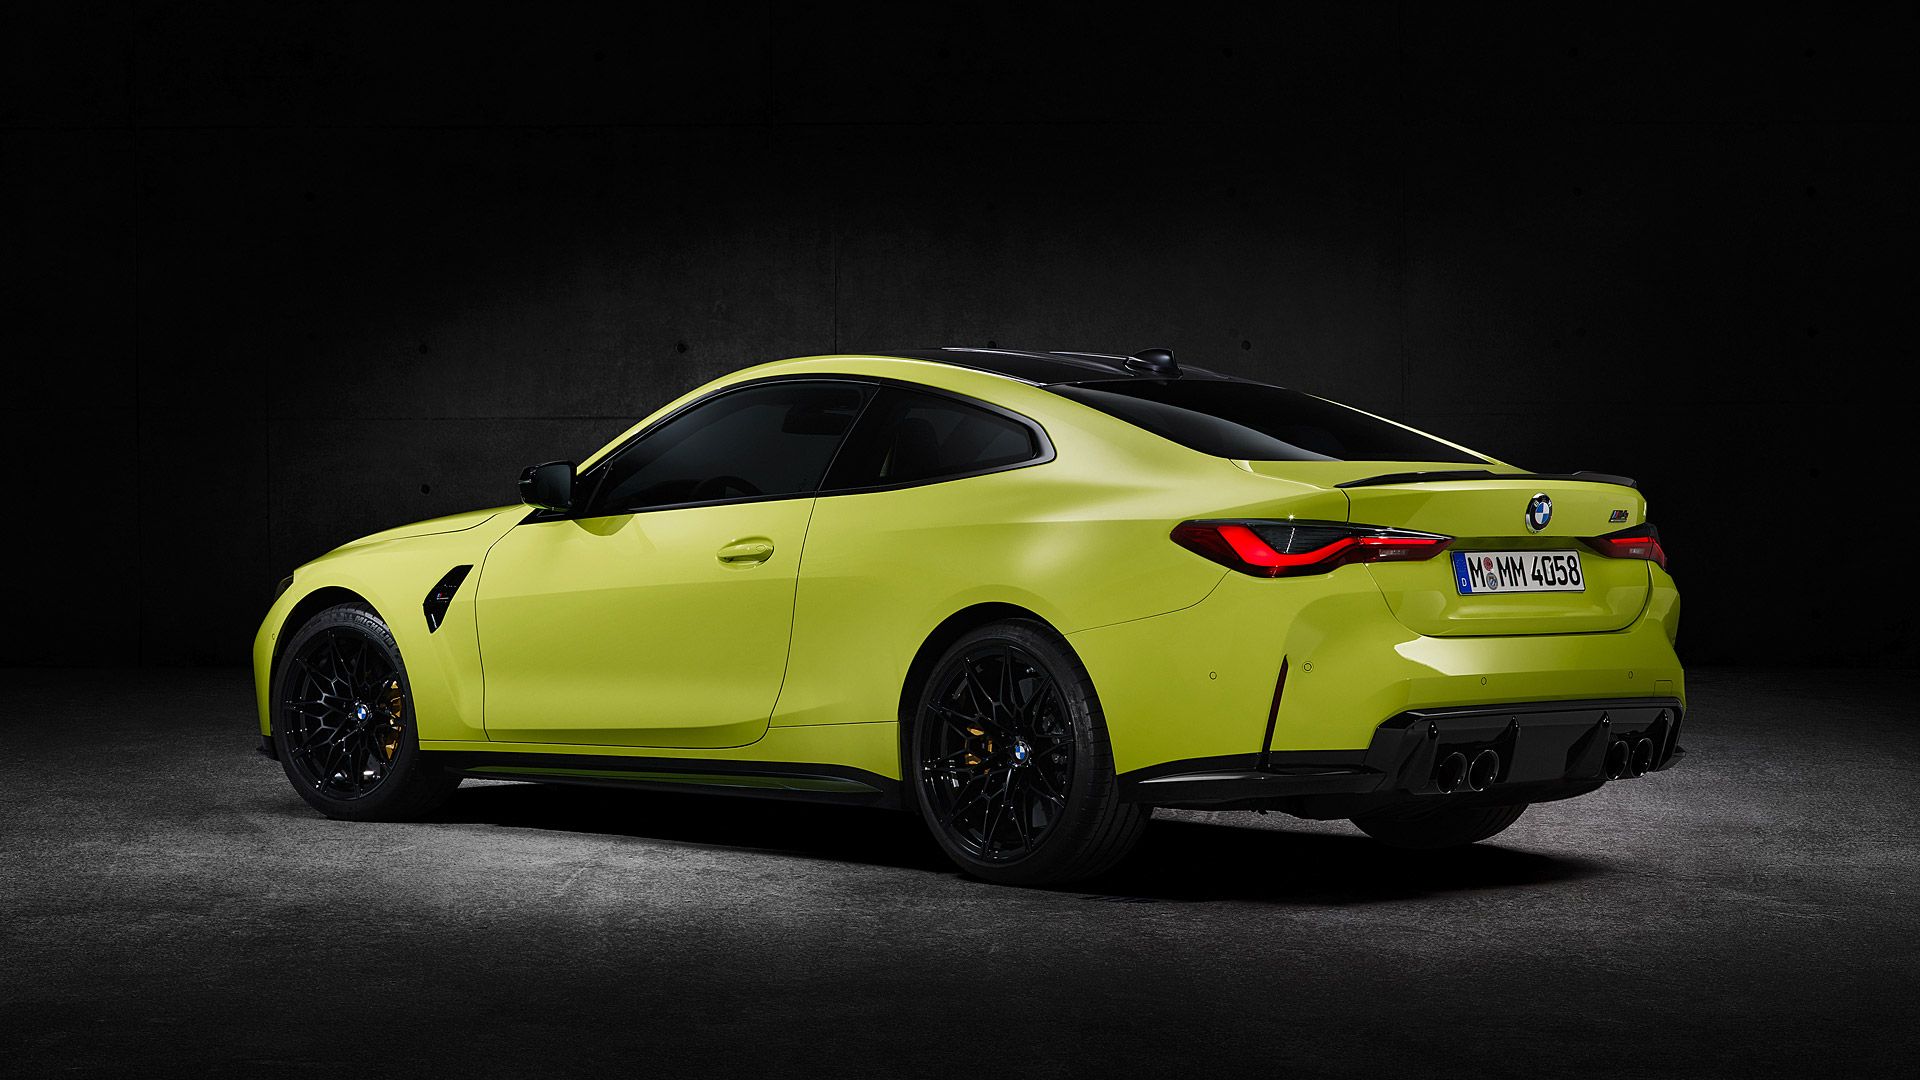 BMW M4 Competition Wallpaper, Specs & Videos